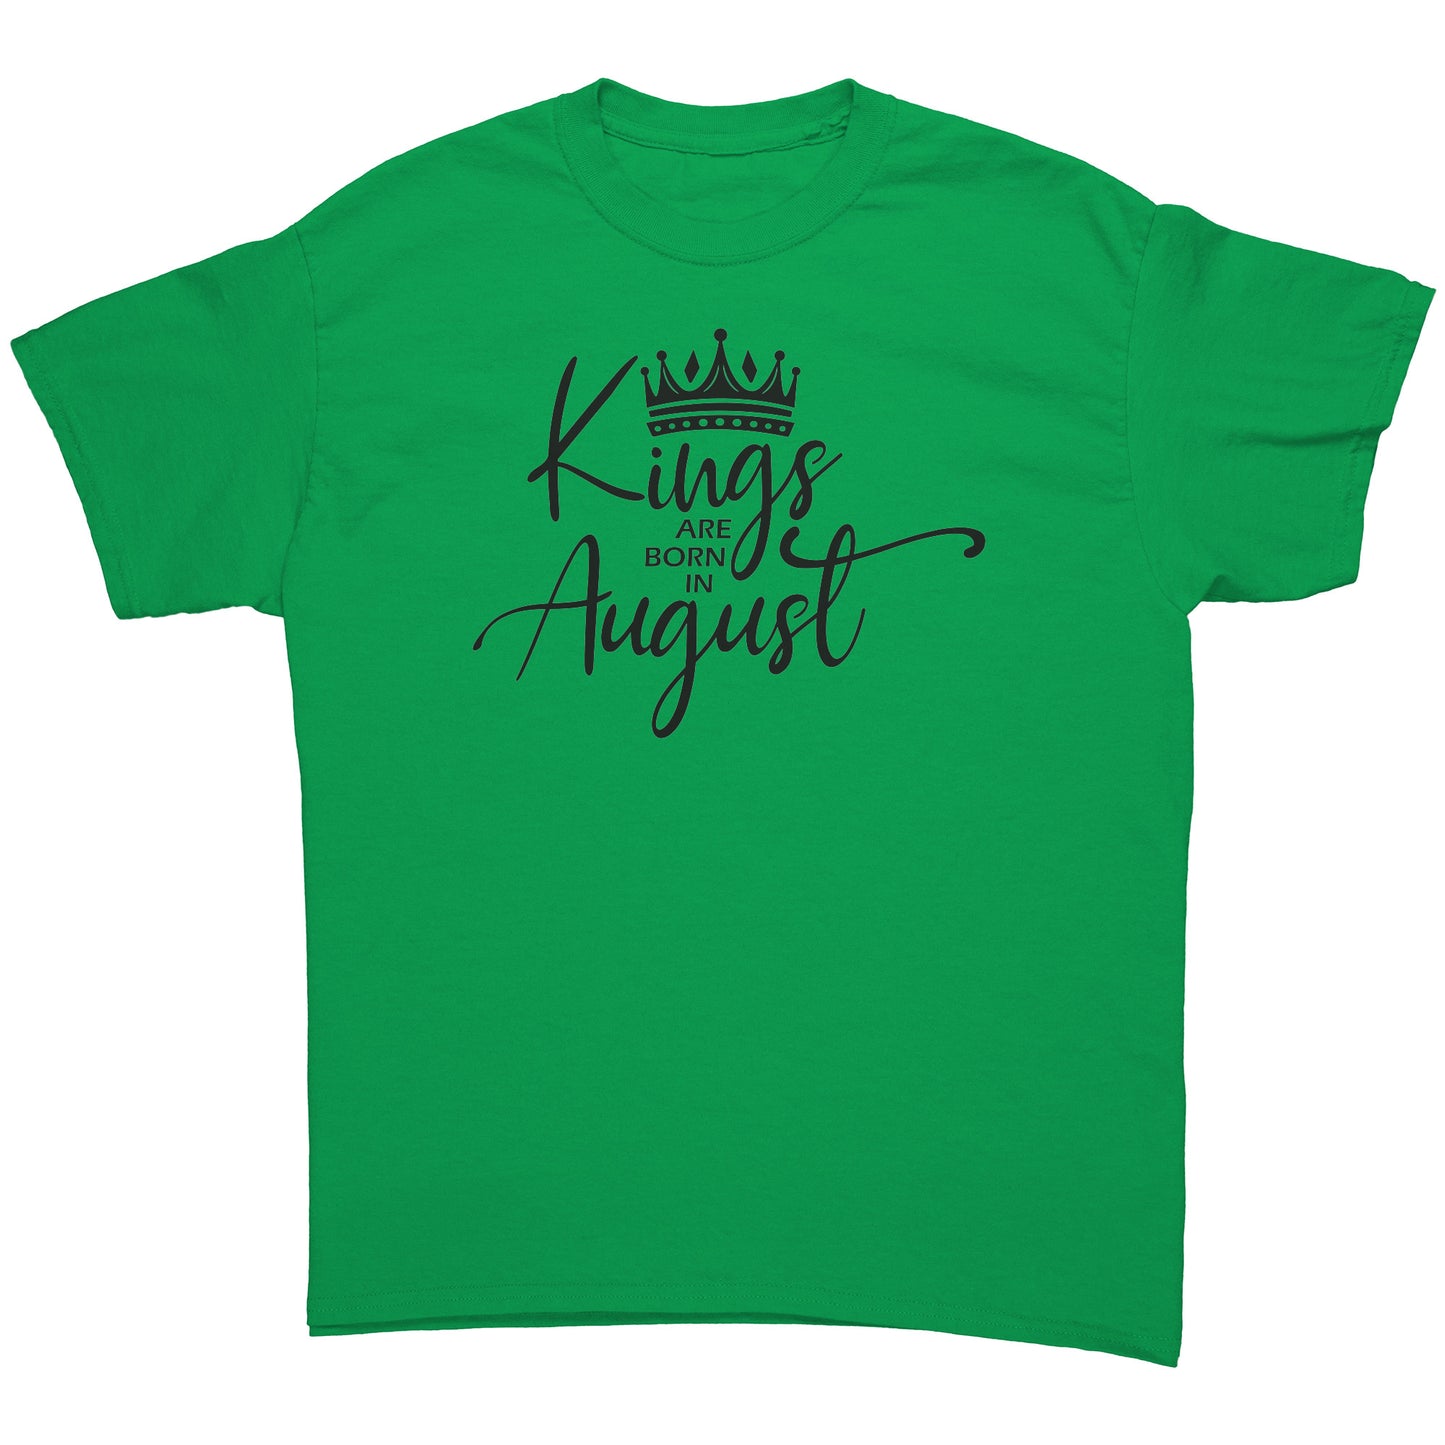 Kings Are Born in August Tee